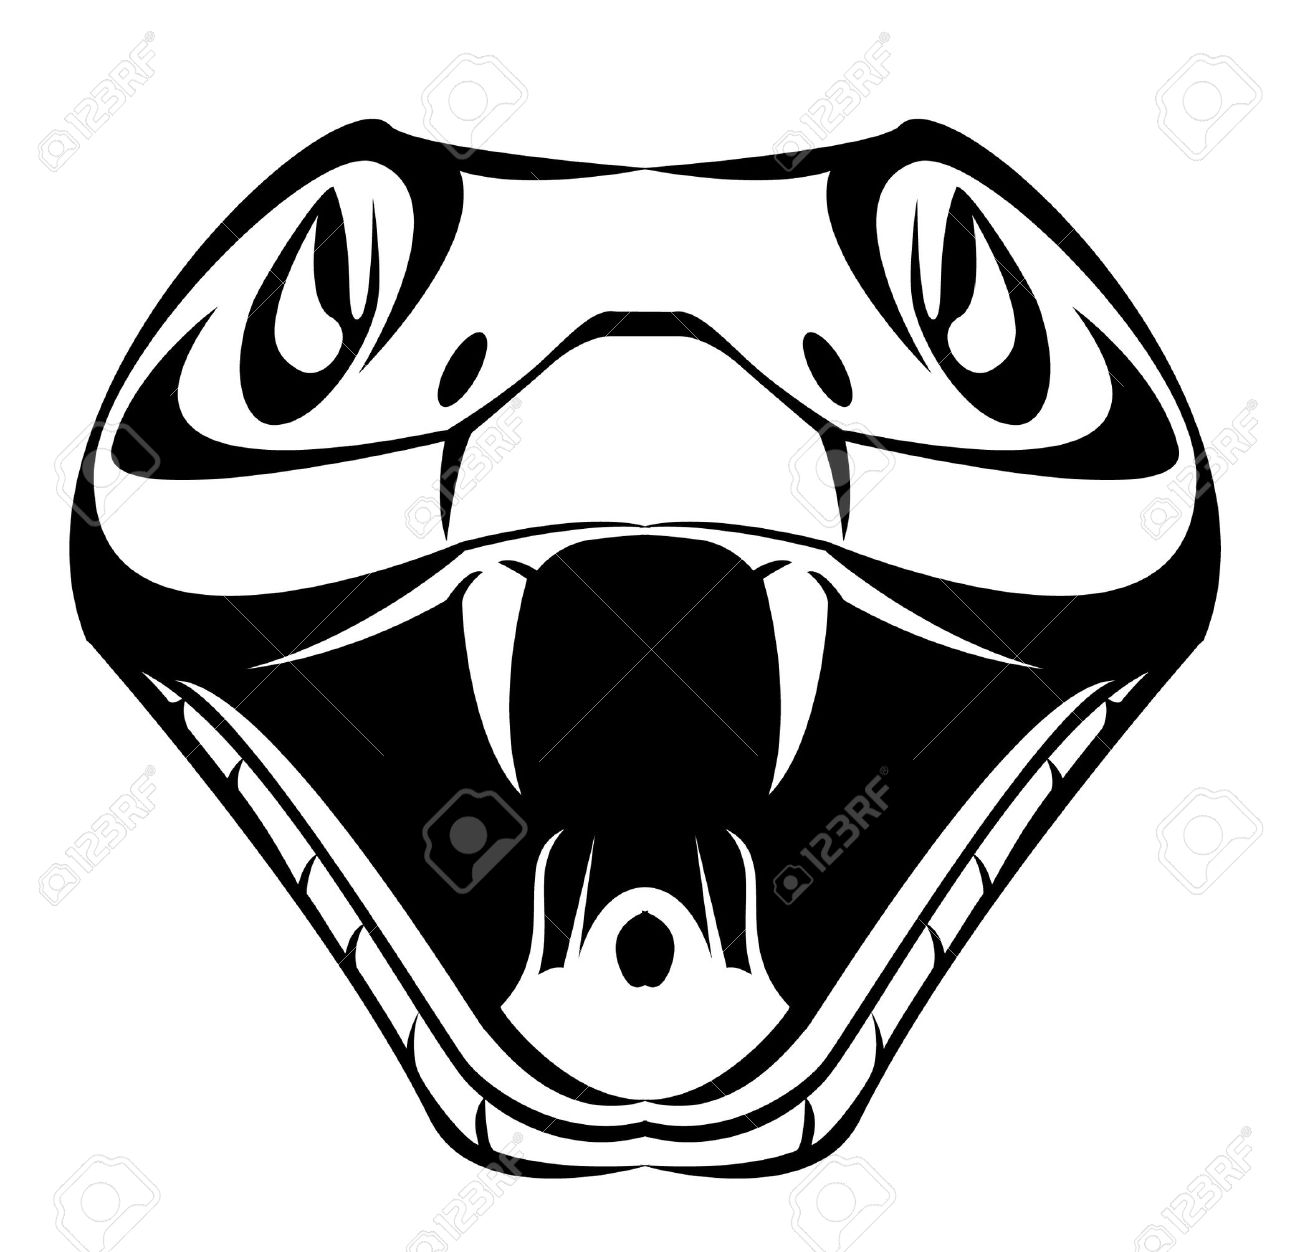 Snake Head Clipart Black And White.